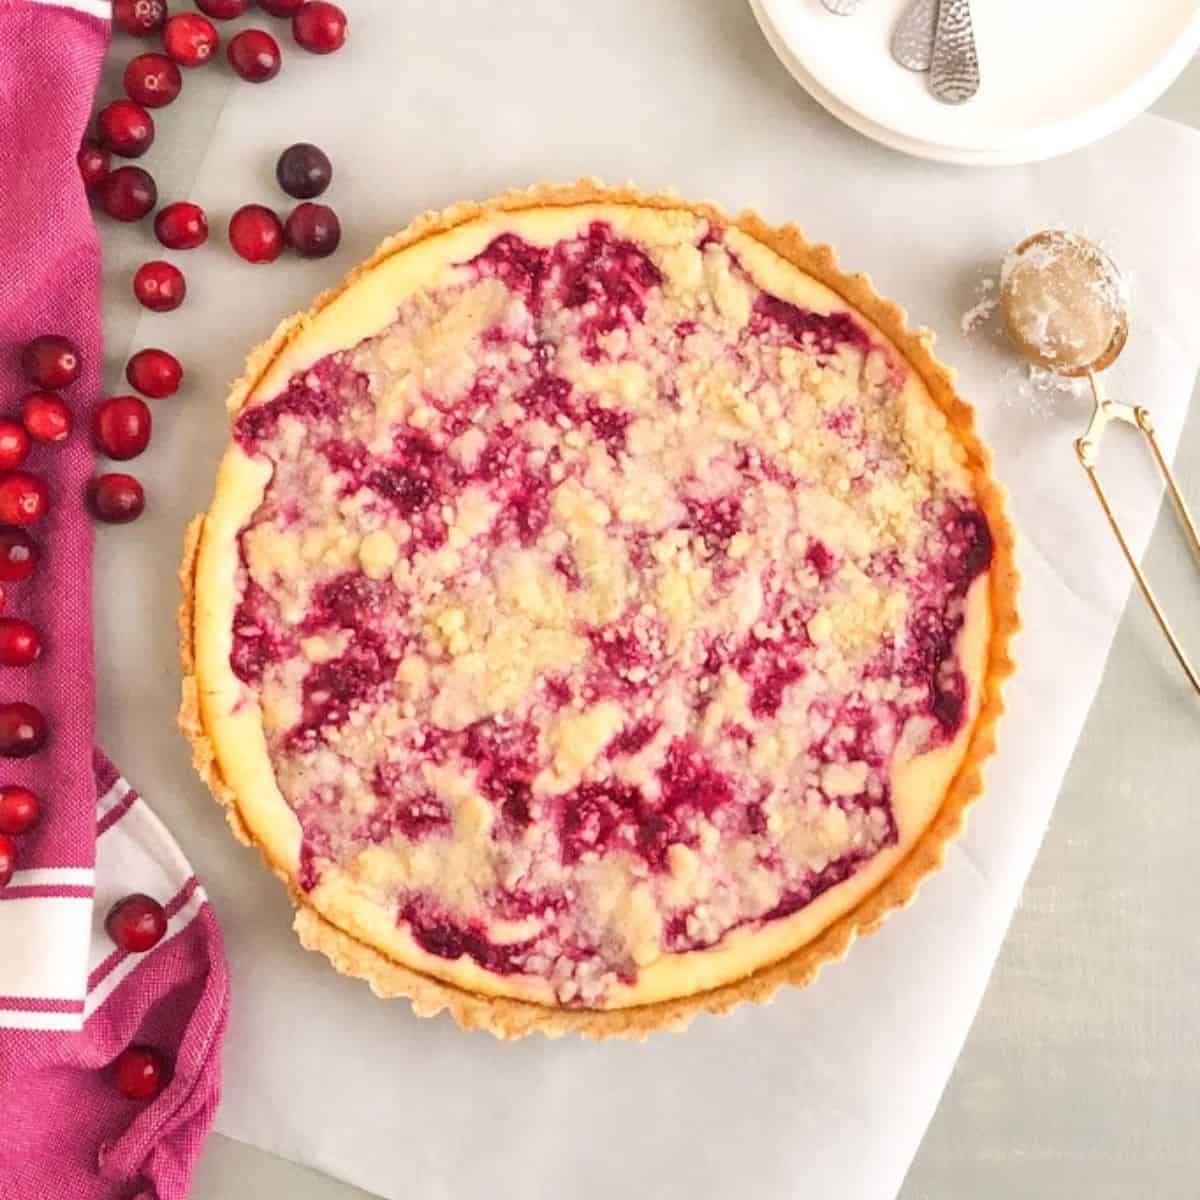 Whole baked cranberry pie on parchment paper next to pink kitchen towel with white accents and whole fresh cranberries. Small round white plates with silver cocktail forks and gold tea strainer filled with powdered sugar on the other side of the tart.